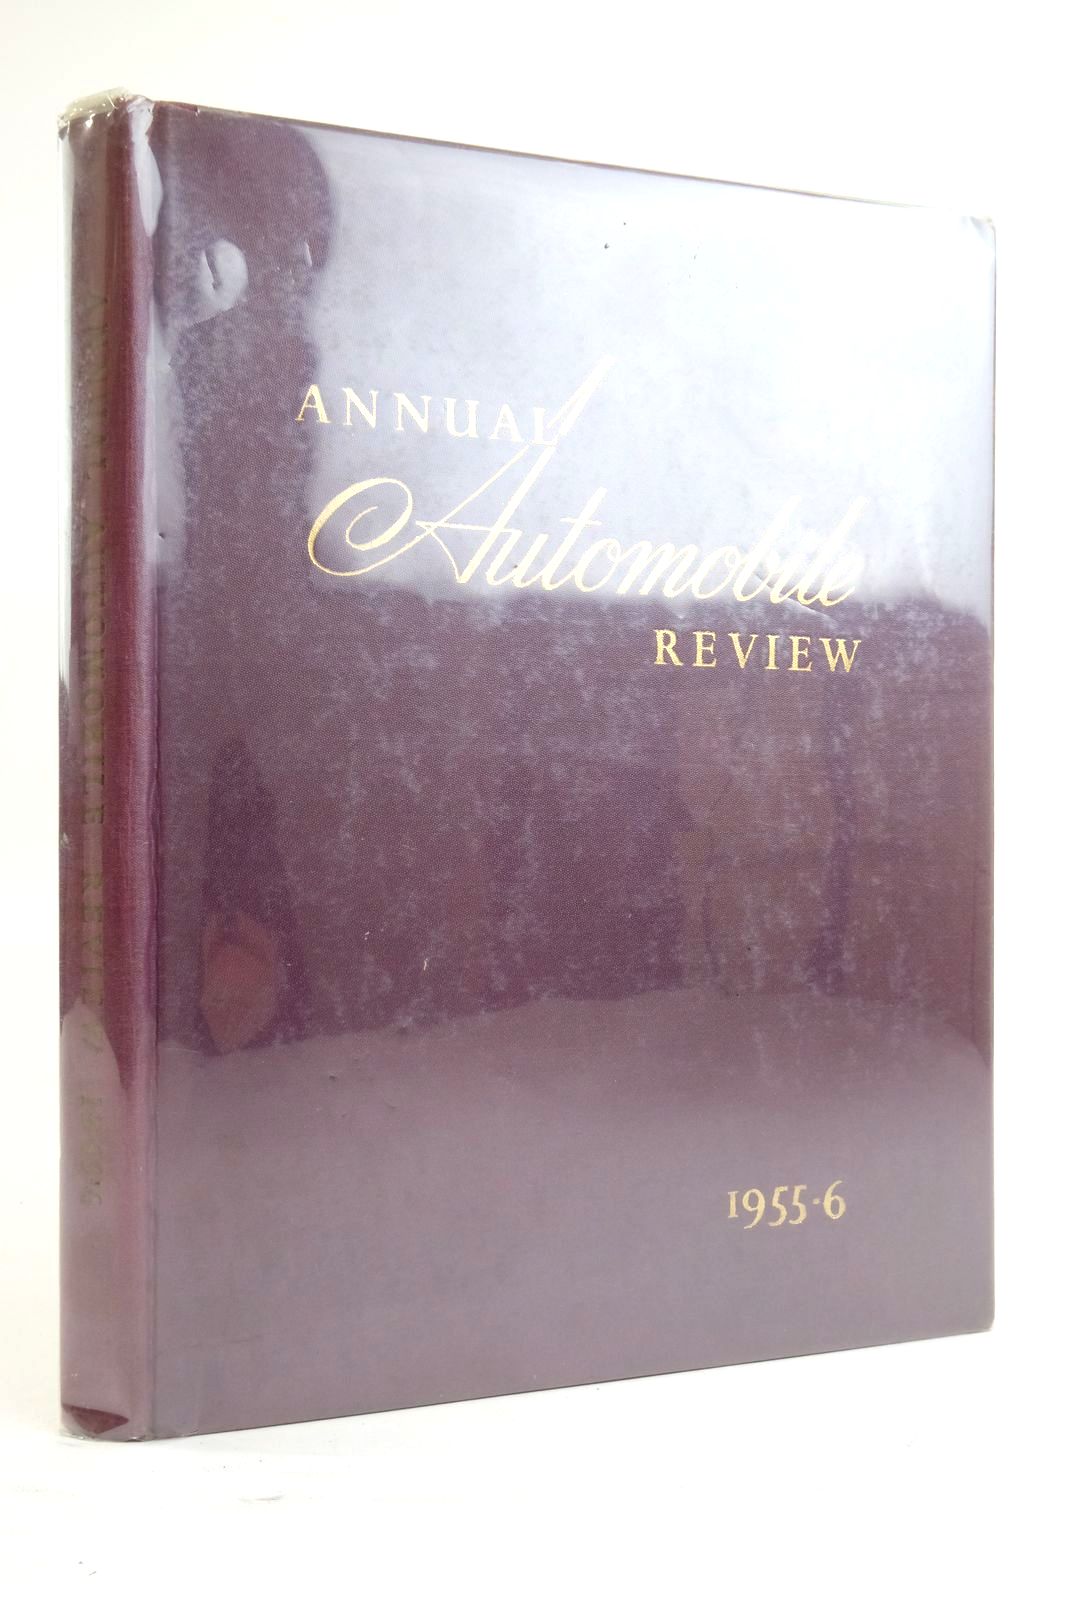 Photo of ANNUAL AUTOMOBILE REVIEW 1955-56 published by Edita S.A. Lausanne (STOCK CODE: 2136473)  for sale by Stella & Rose's Books